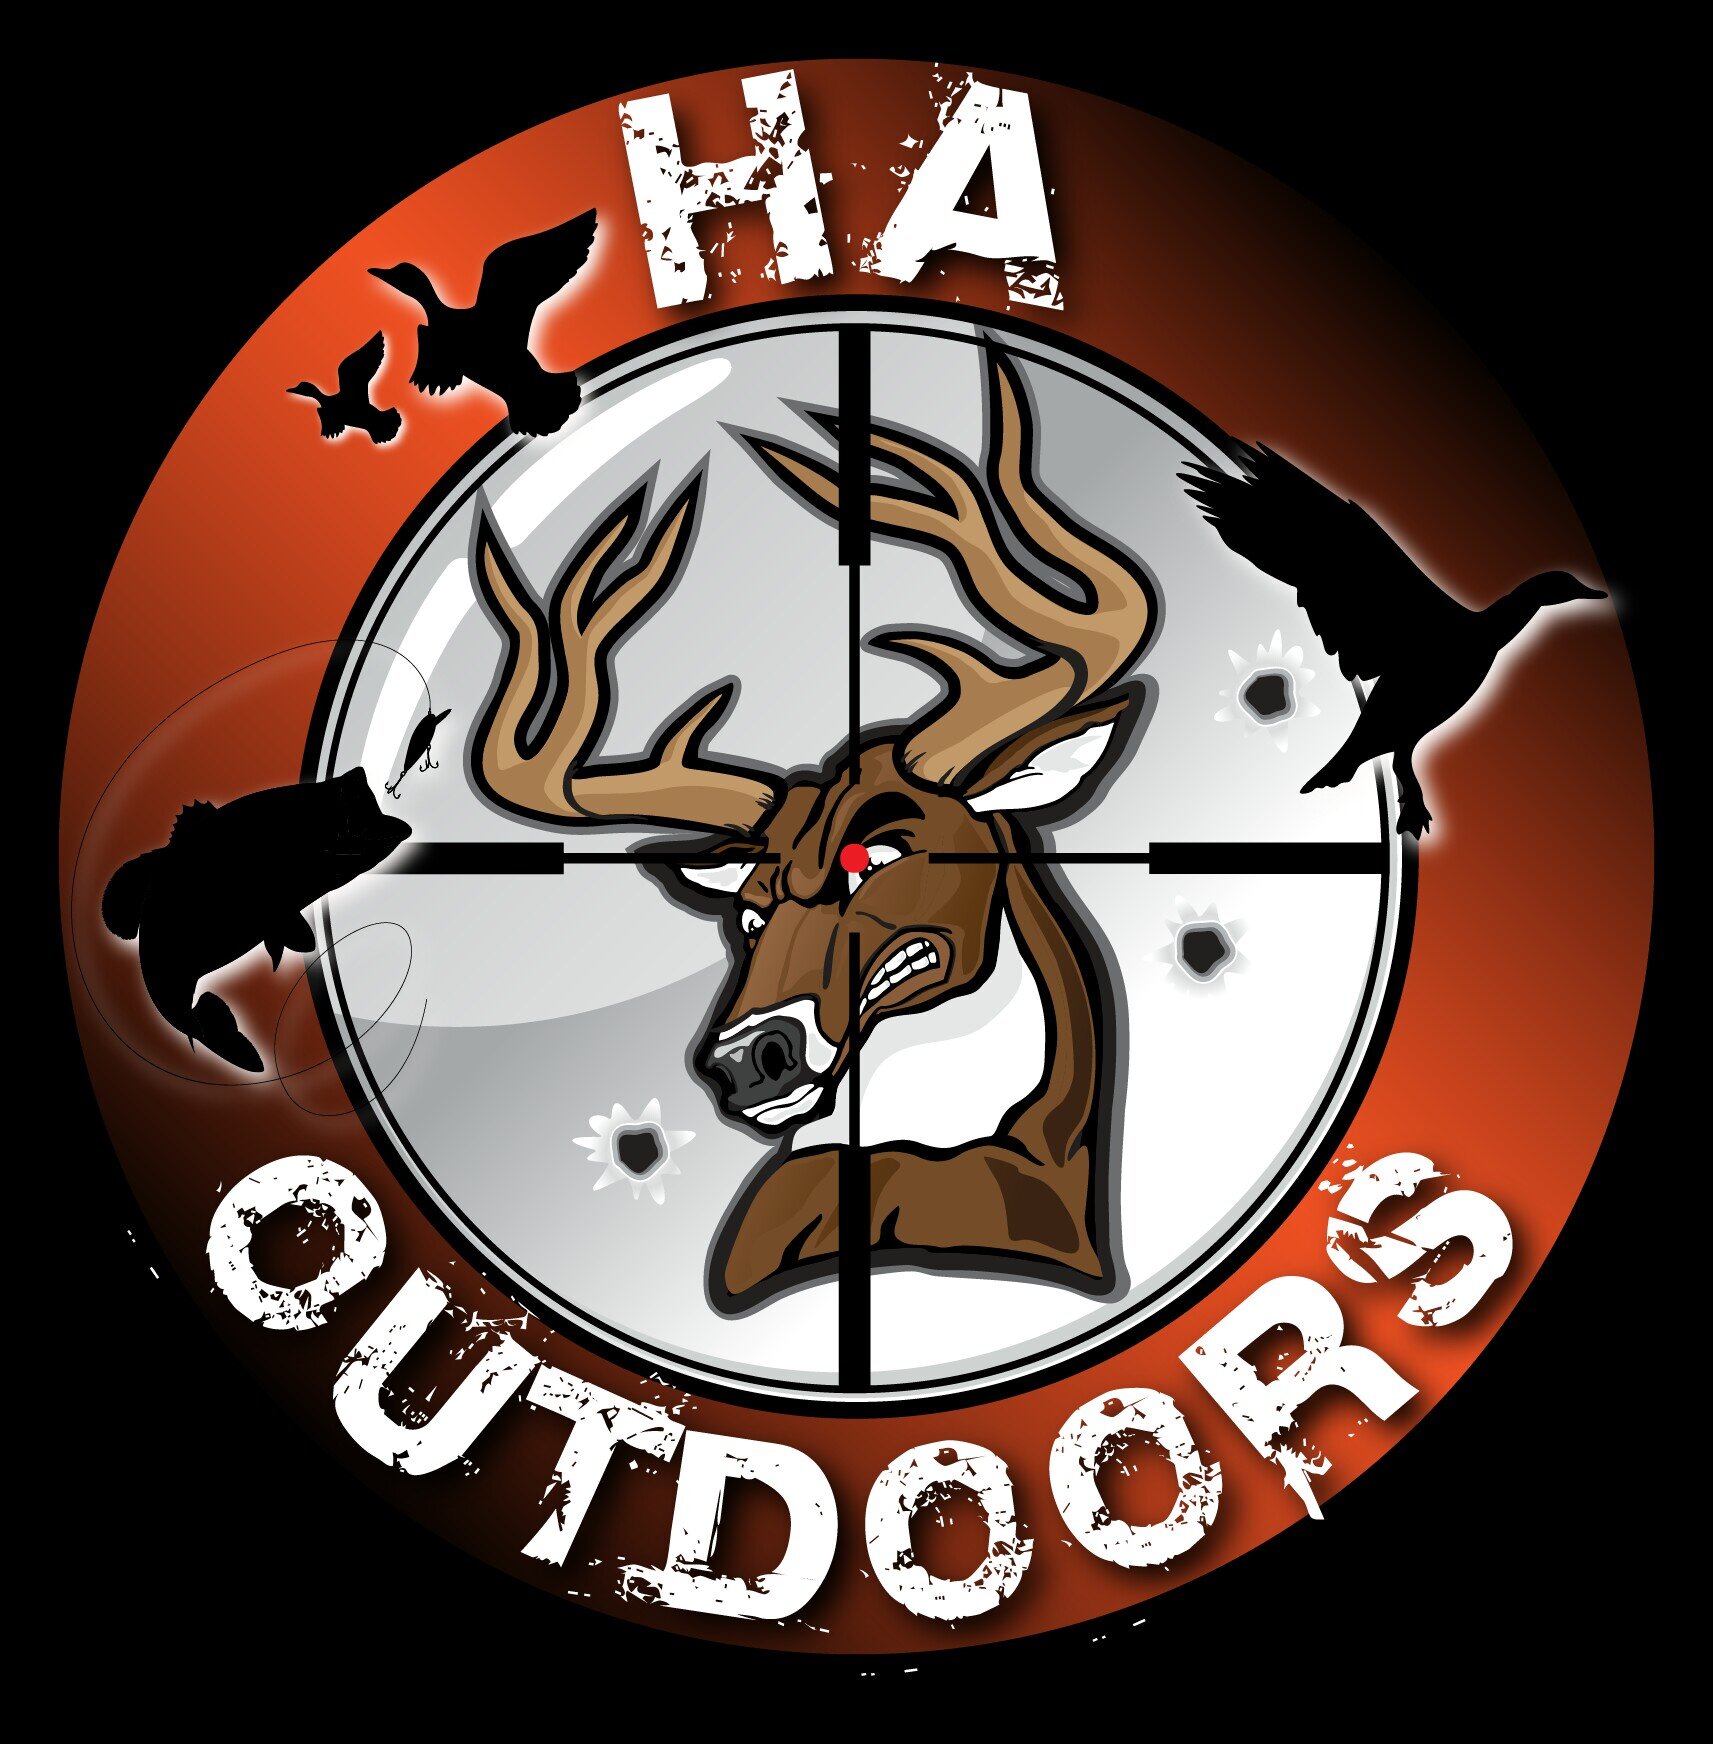 Working class American Hunters, sharing our #HuntinAddiction with the world! #veteranowned @tsparksWDE @Cody_HAOutdoors @HermanJohnny @danagreenhill @odisskohn